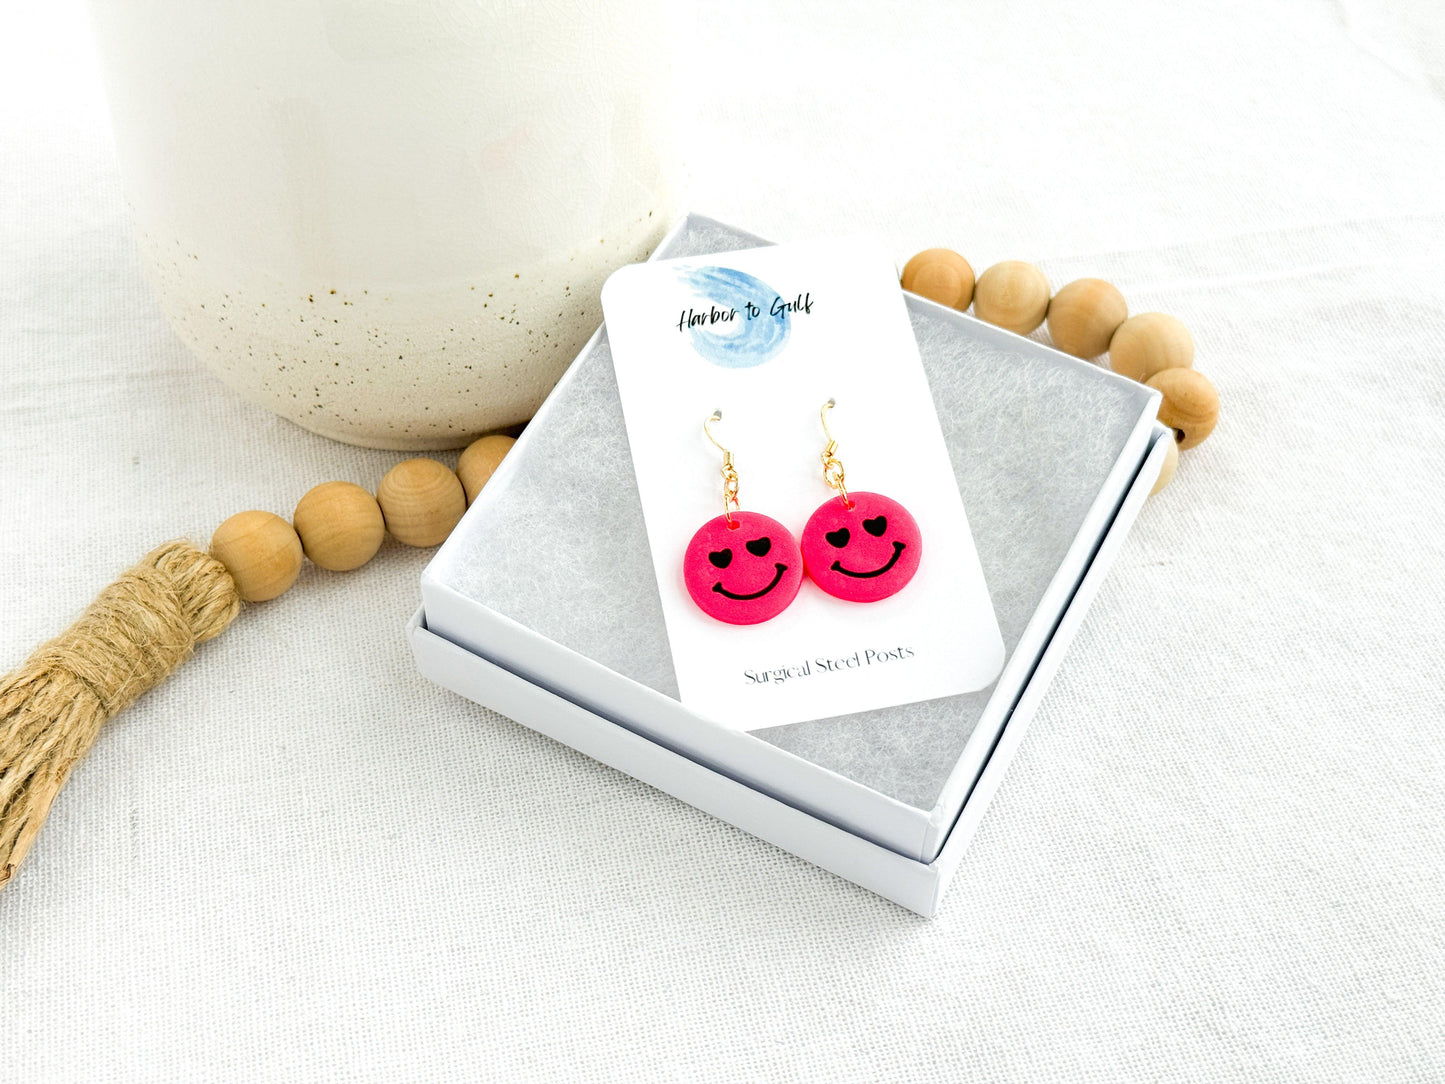 Hot Pink Smiley Face Earrings, Handmade Jewelry, Polymer Clay, Surgical Steel, Gifts for Women - Harbor to Gulf Co.